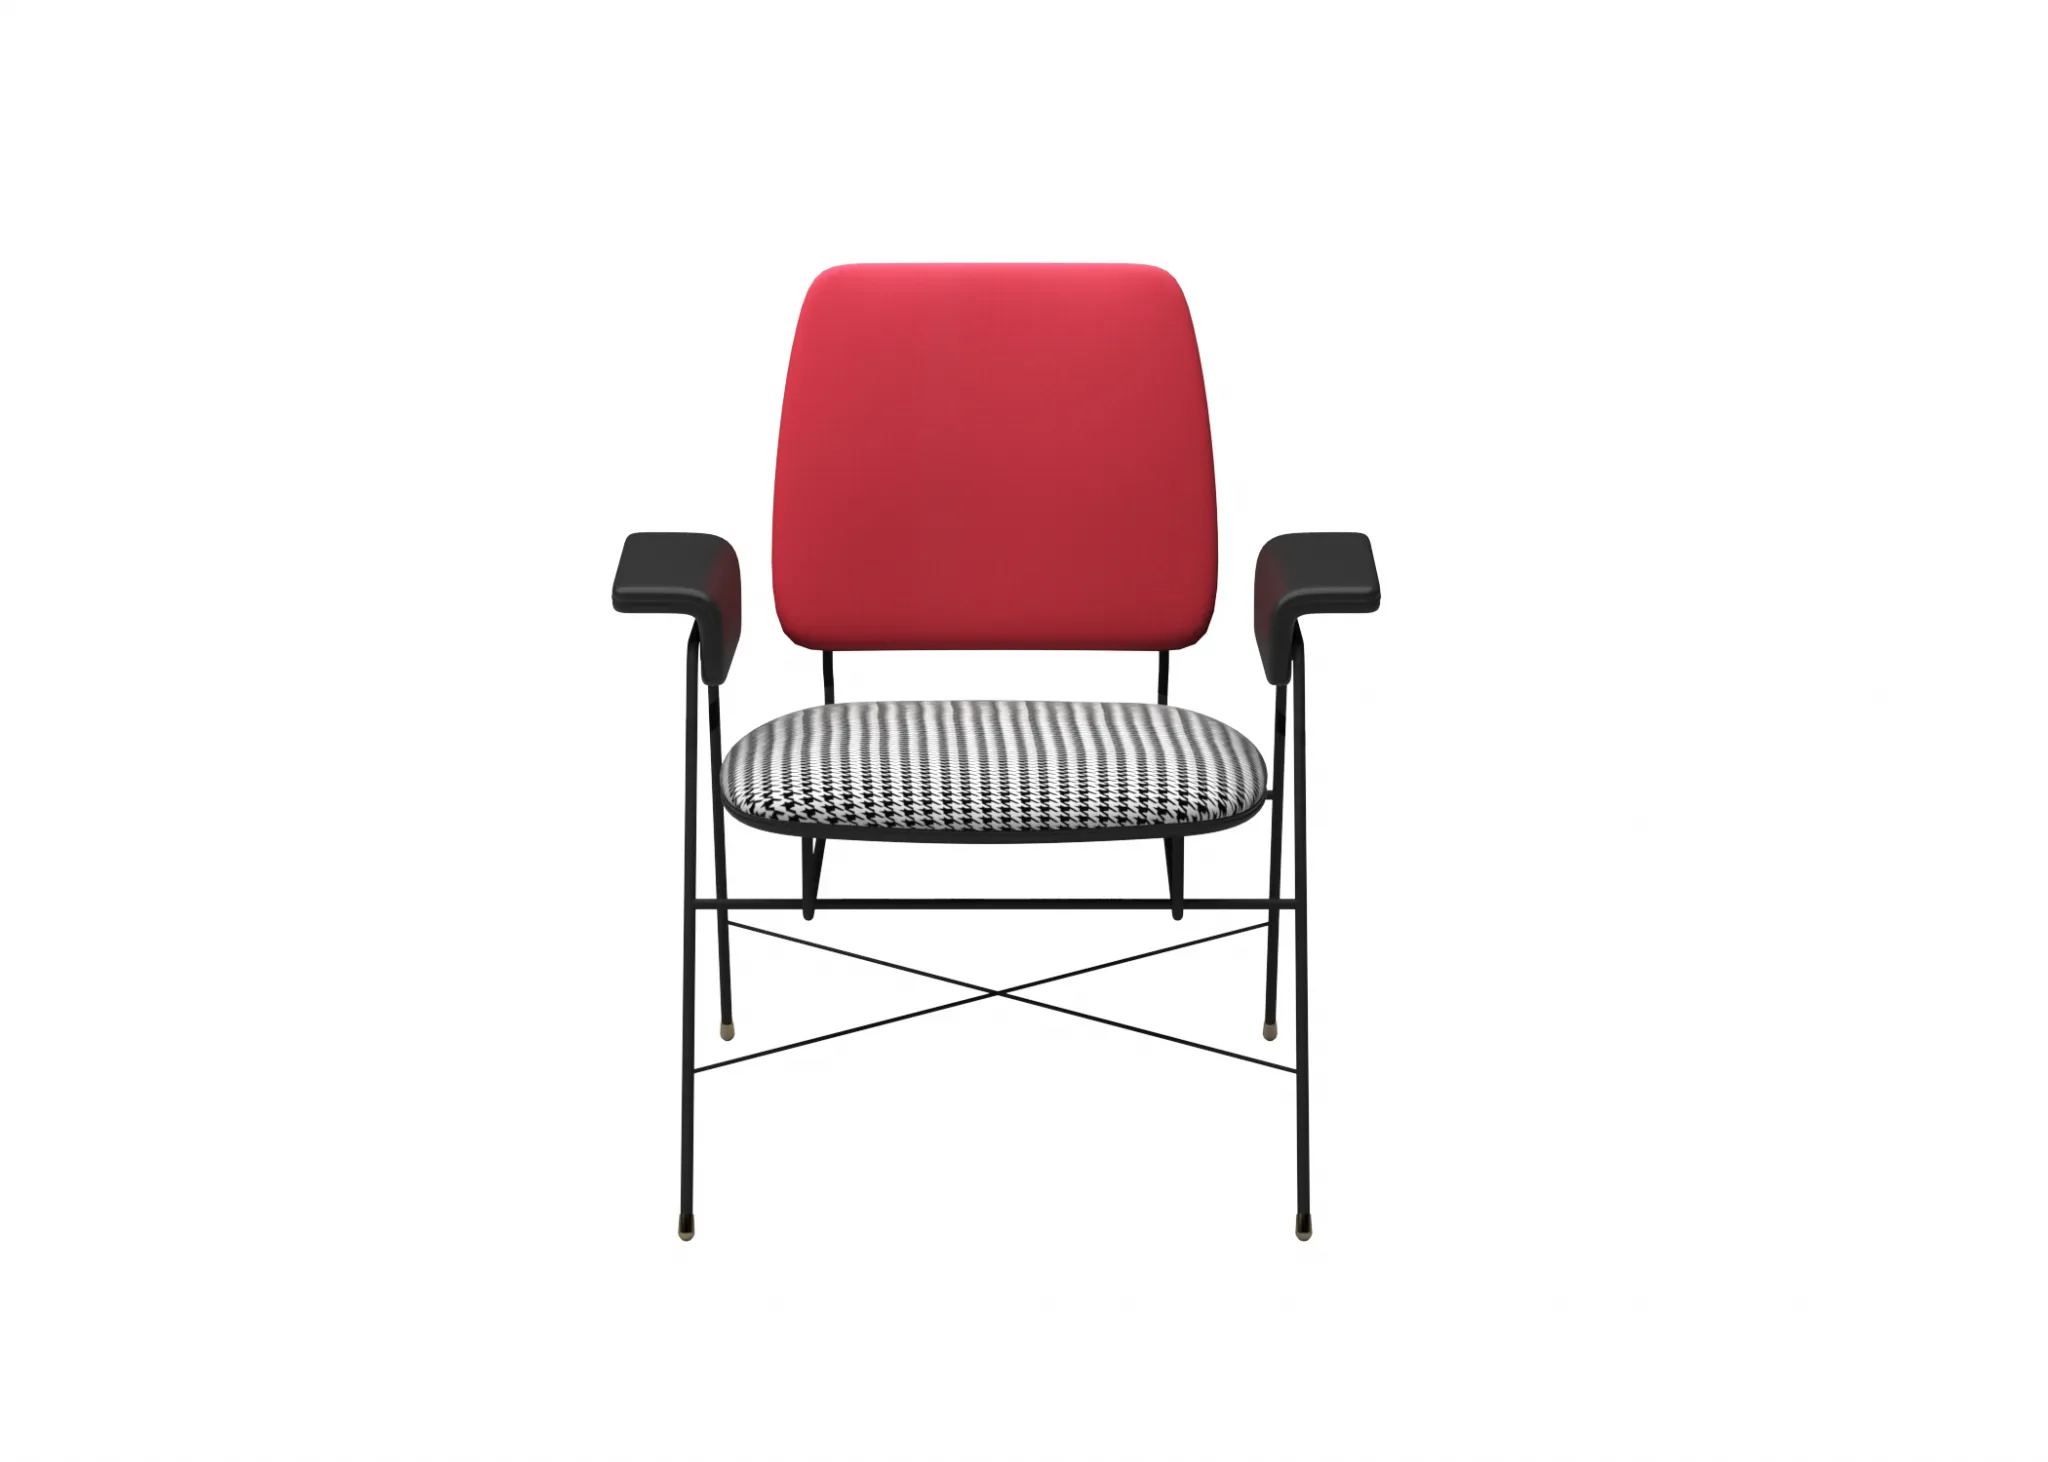 FURNITURE 3D MODELS – CHAIRS – 0439